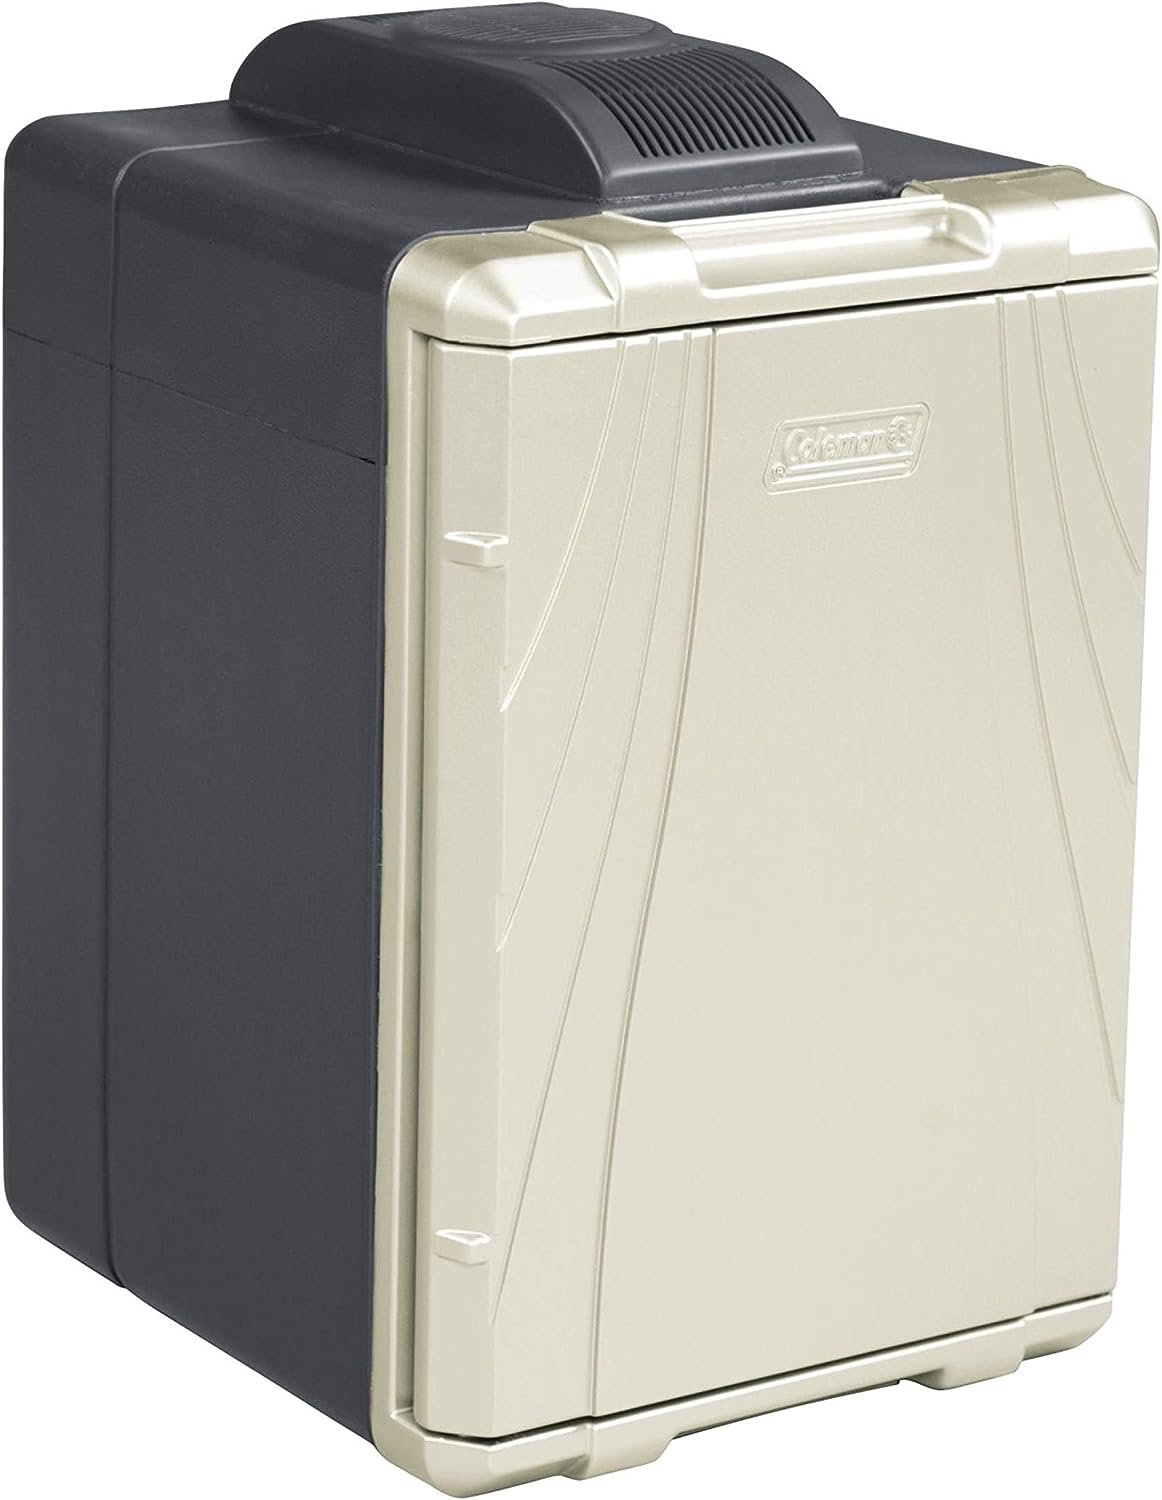 Coleman Mini Refrigerator: Compact Cooling Solutions